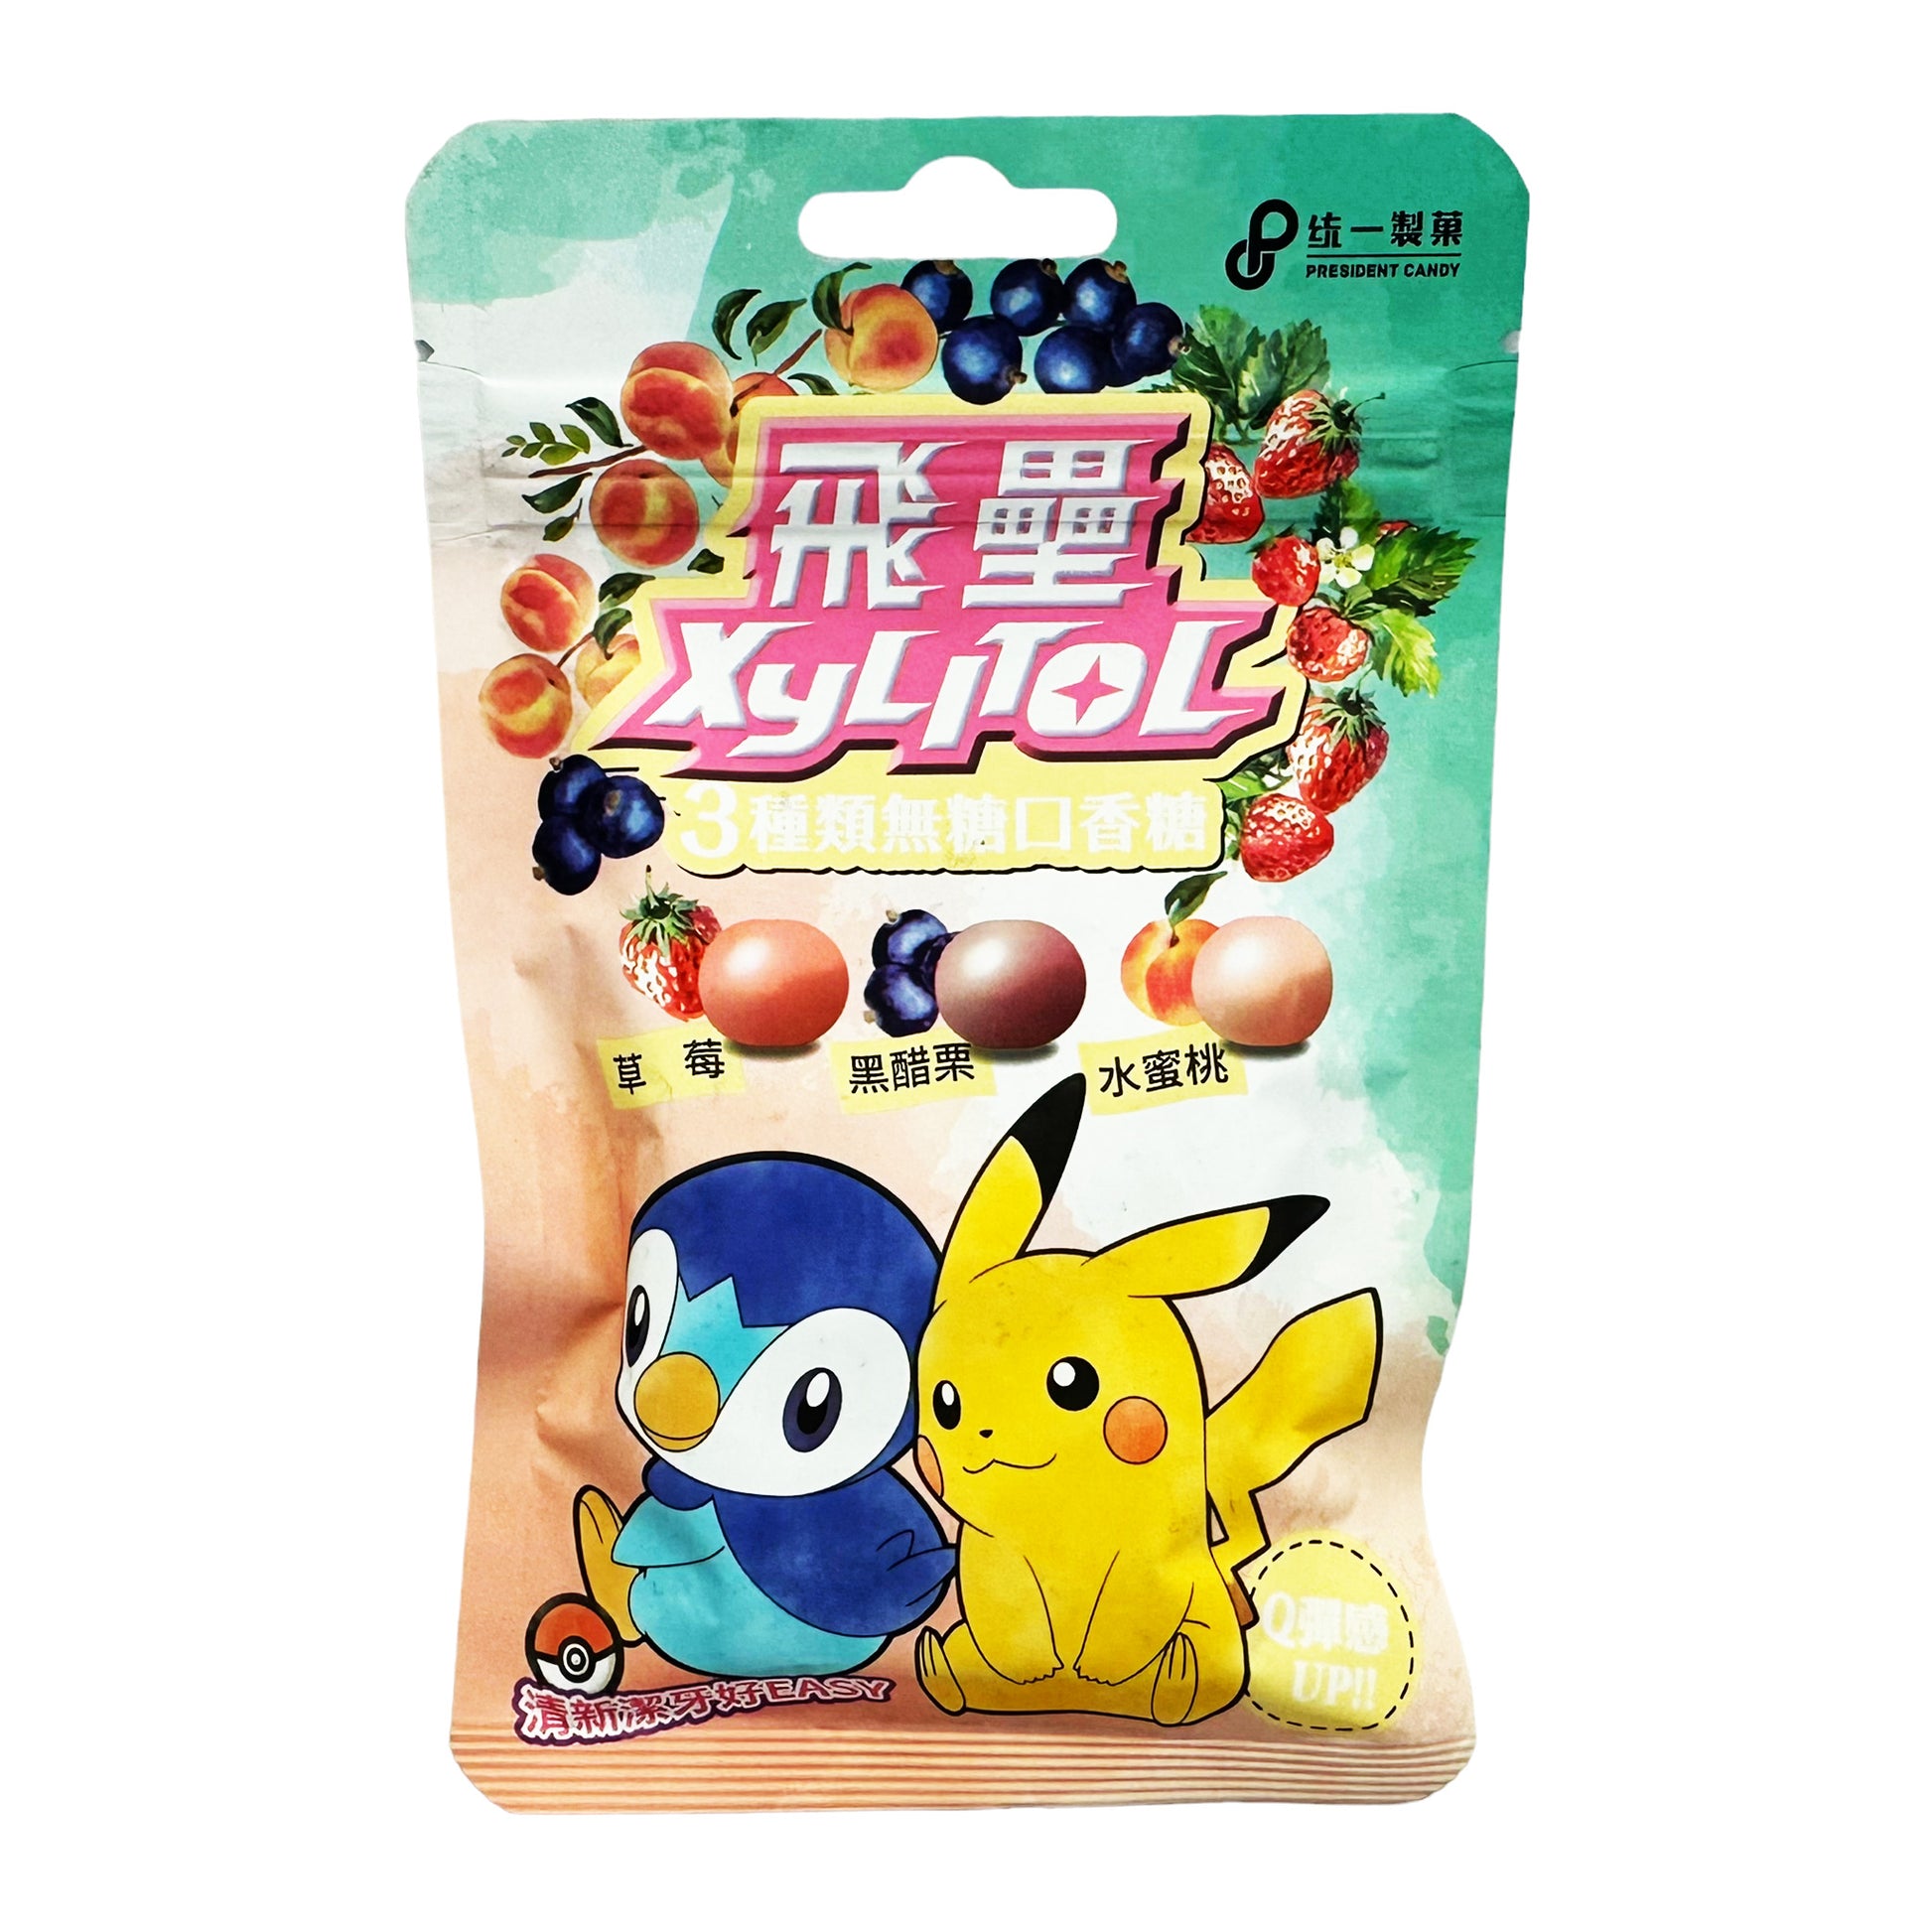 Front graphic image of President Candy Pokemon Xylitol Sugar Free Bubble Gum - Assorted Fruit Flavor 1.58oz (45g)